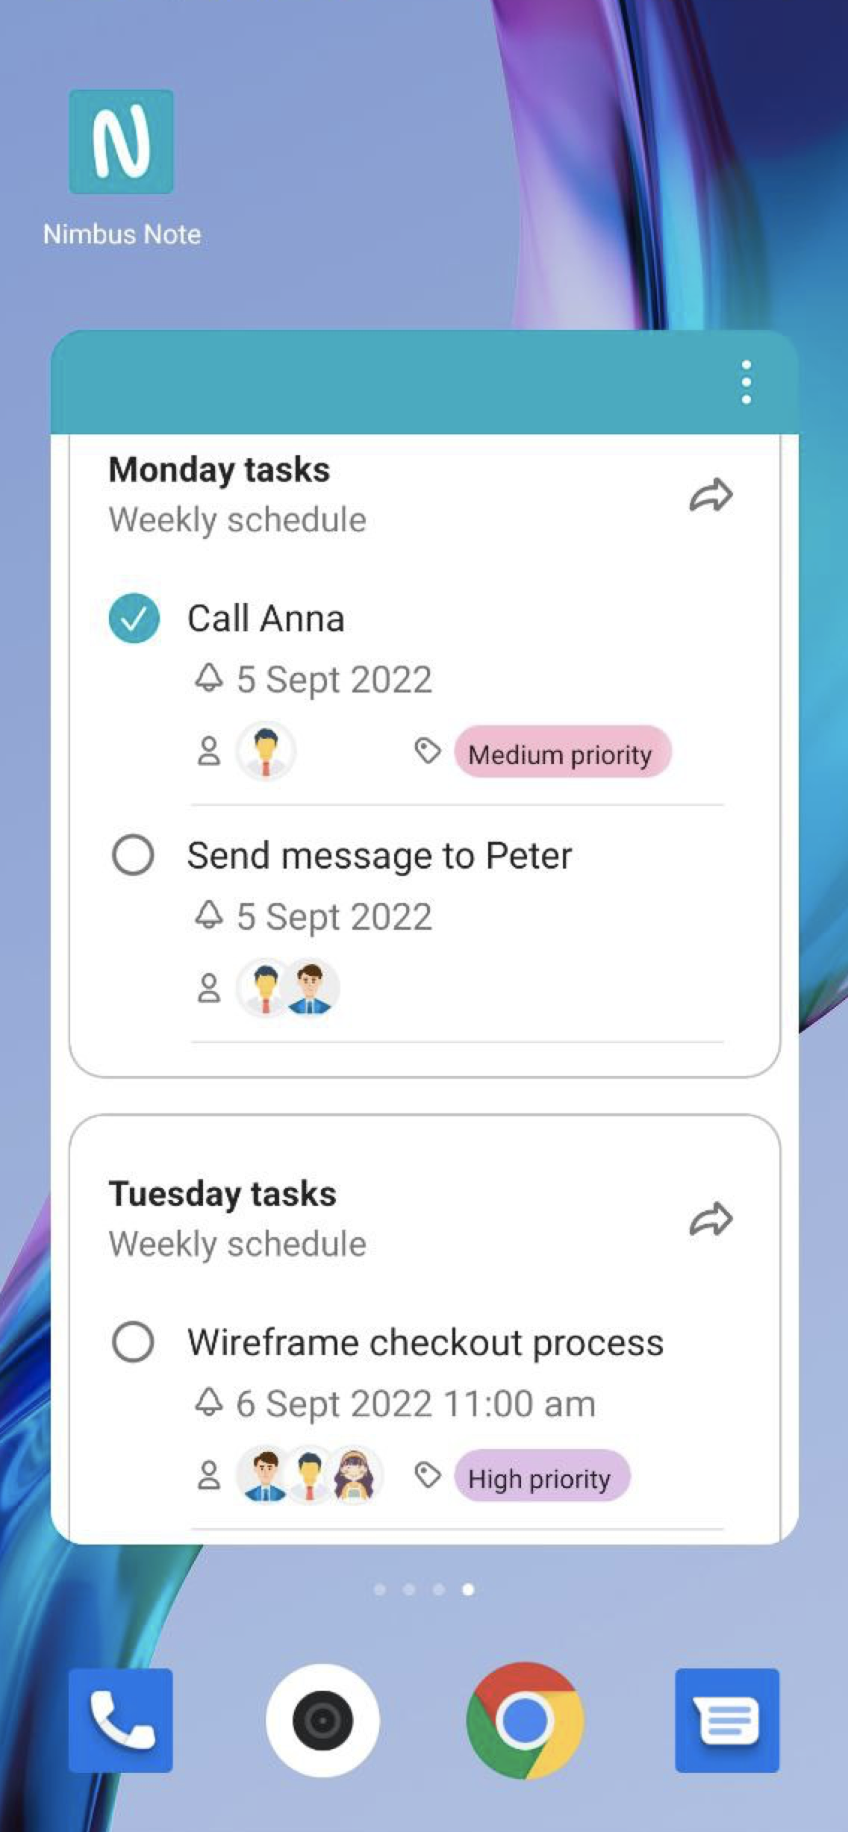 All tasks list widget allows you to view all task lists from the selected workspace in one place. 